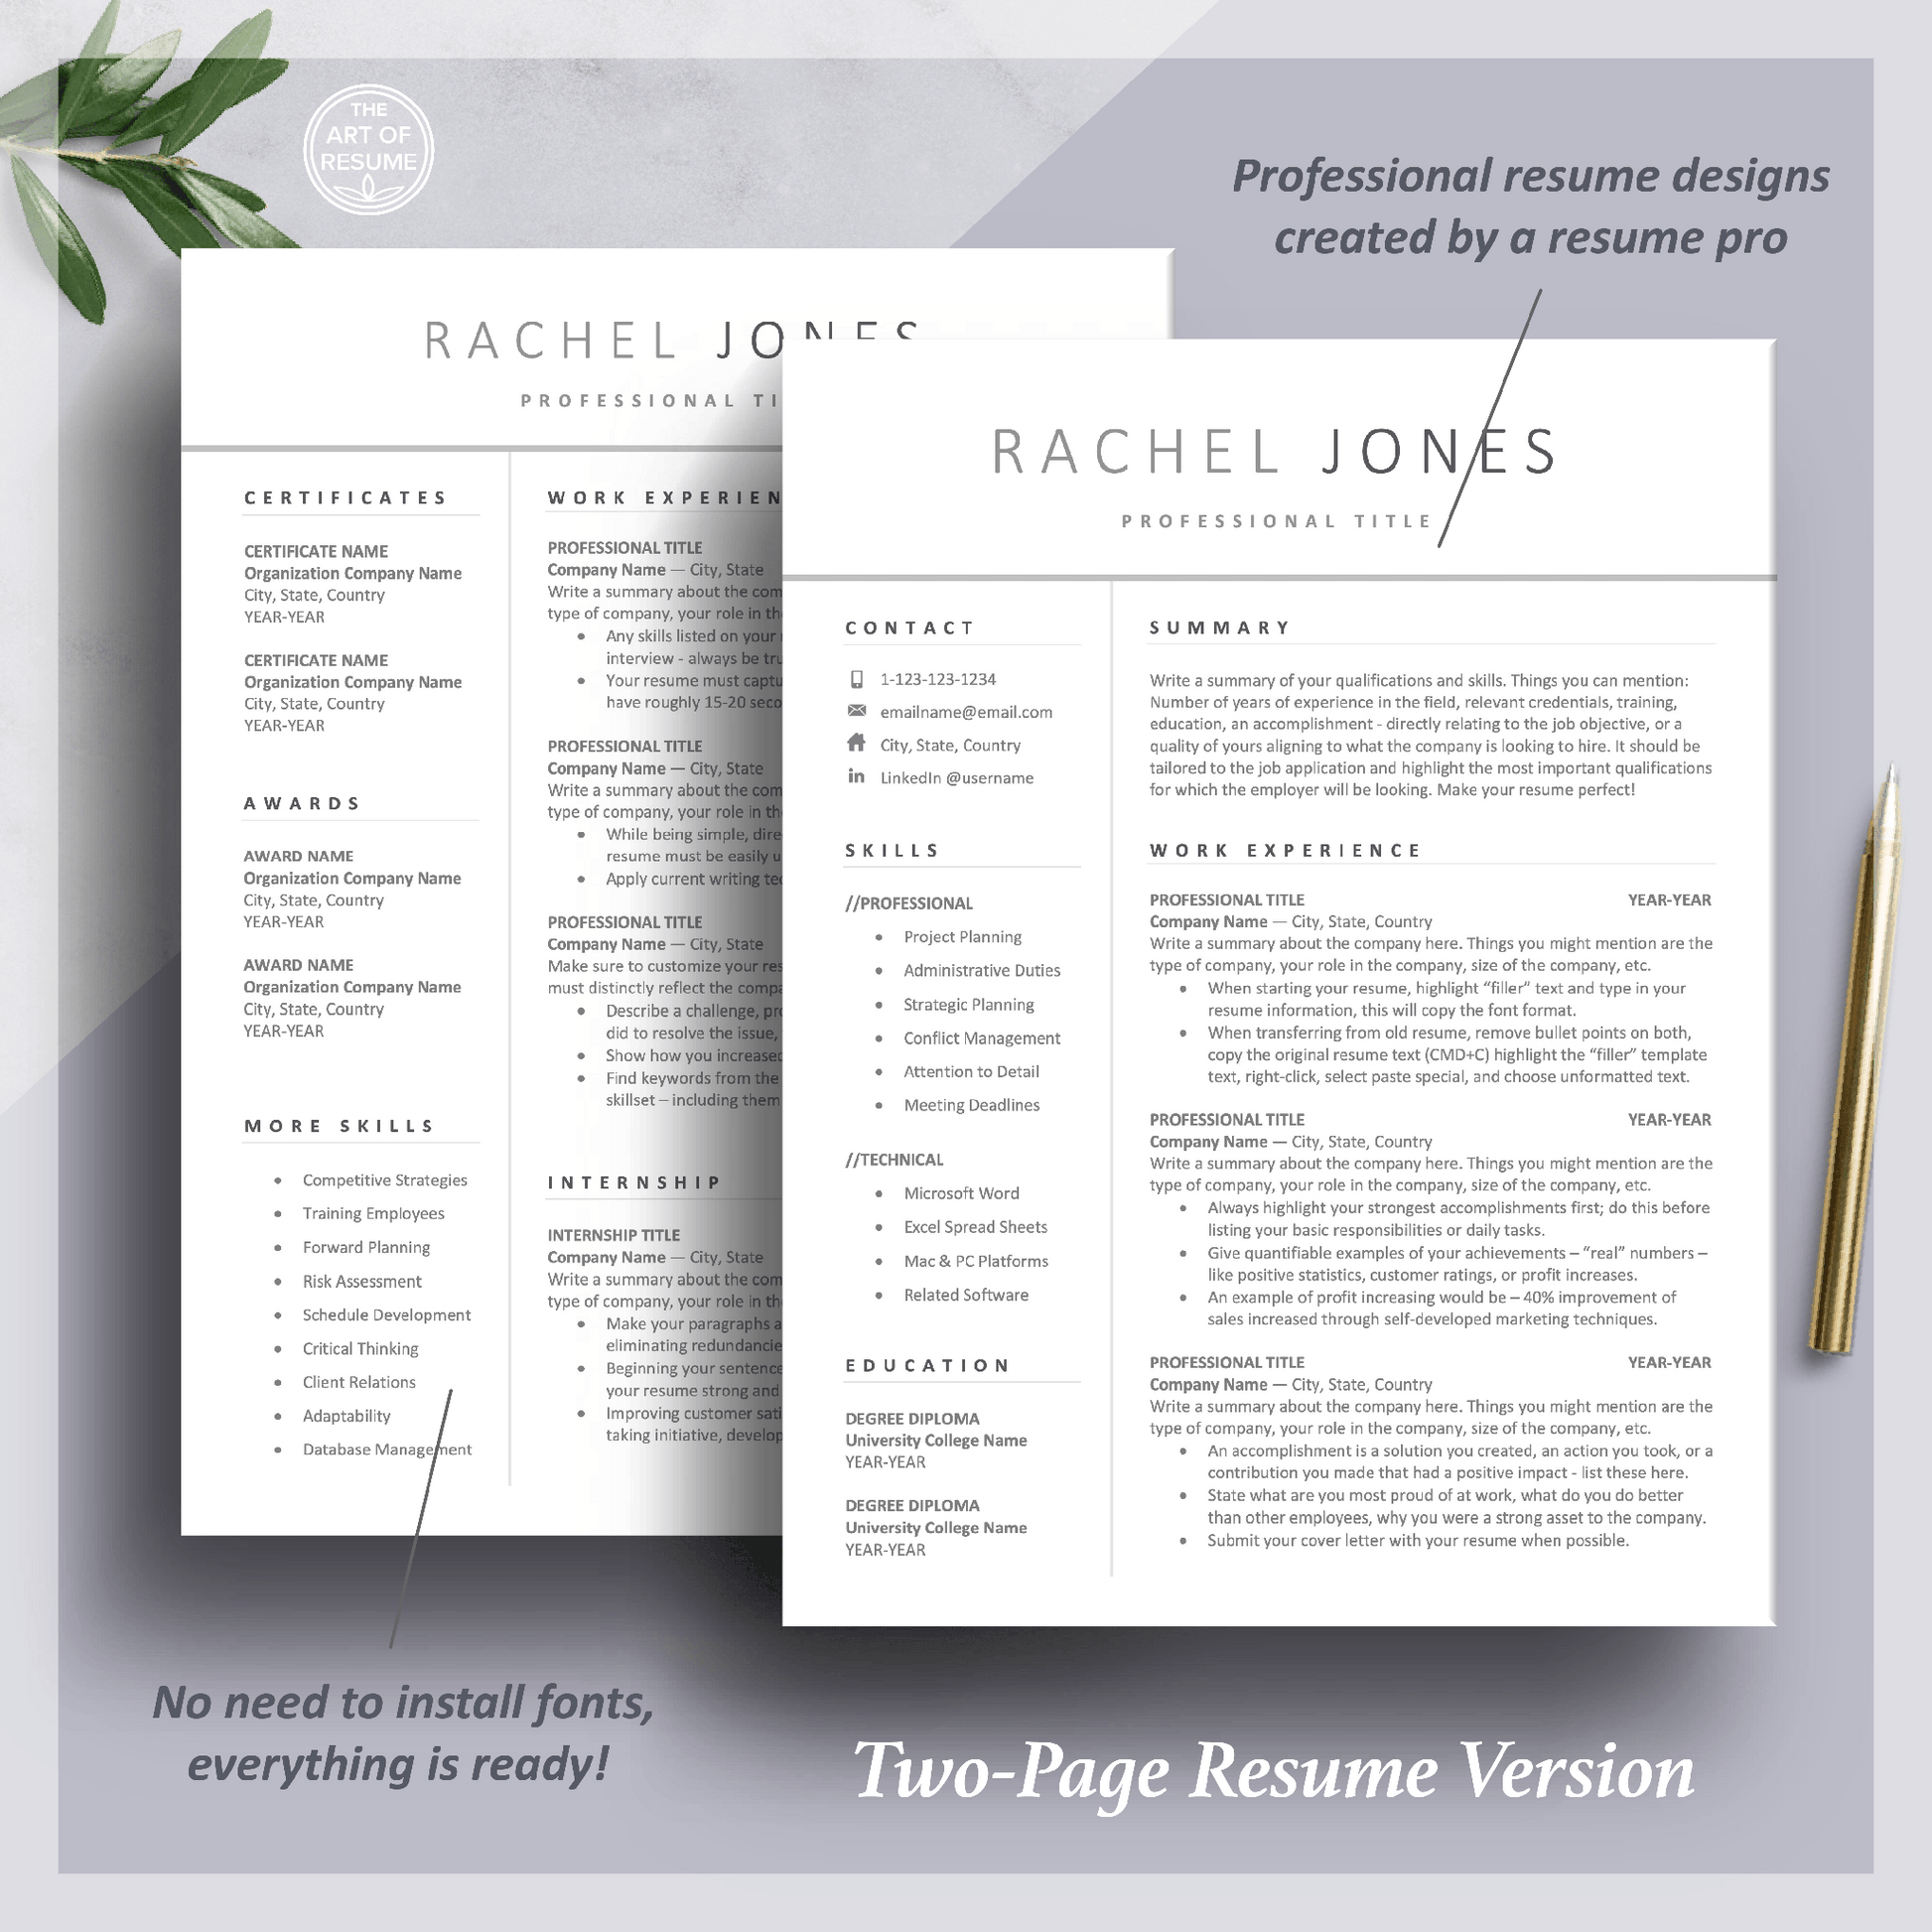 Simple Resume Template | Professional Resume for Any Career - Student CV - The Art of Resume